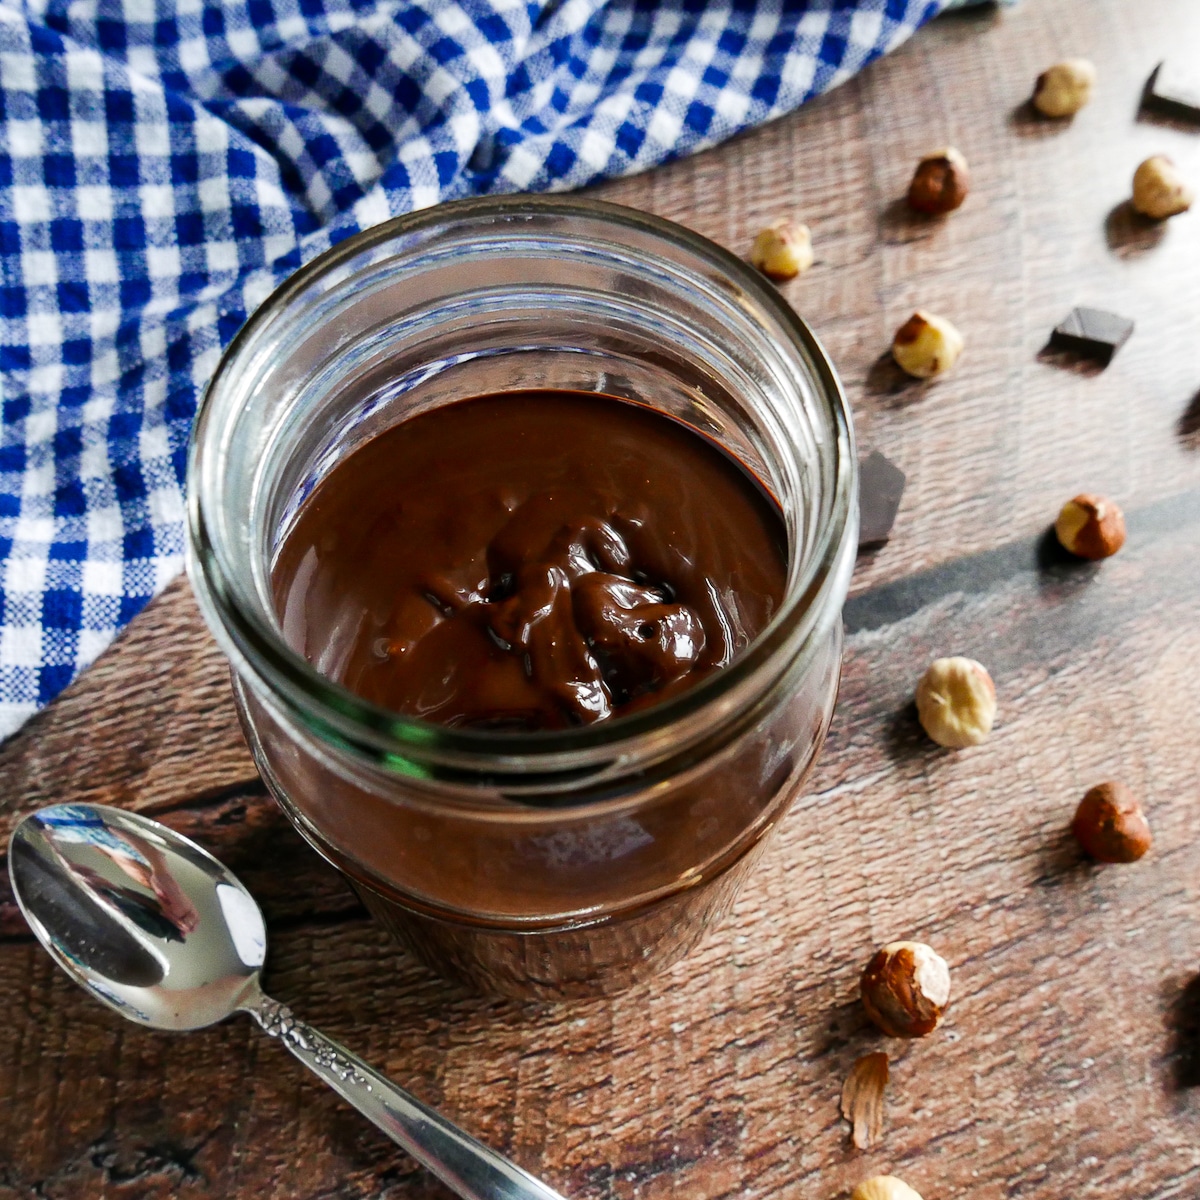 Homemade nutella in a glass jar with a spoon and hazelnuts scattered around.